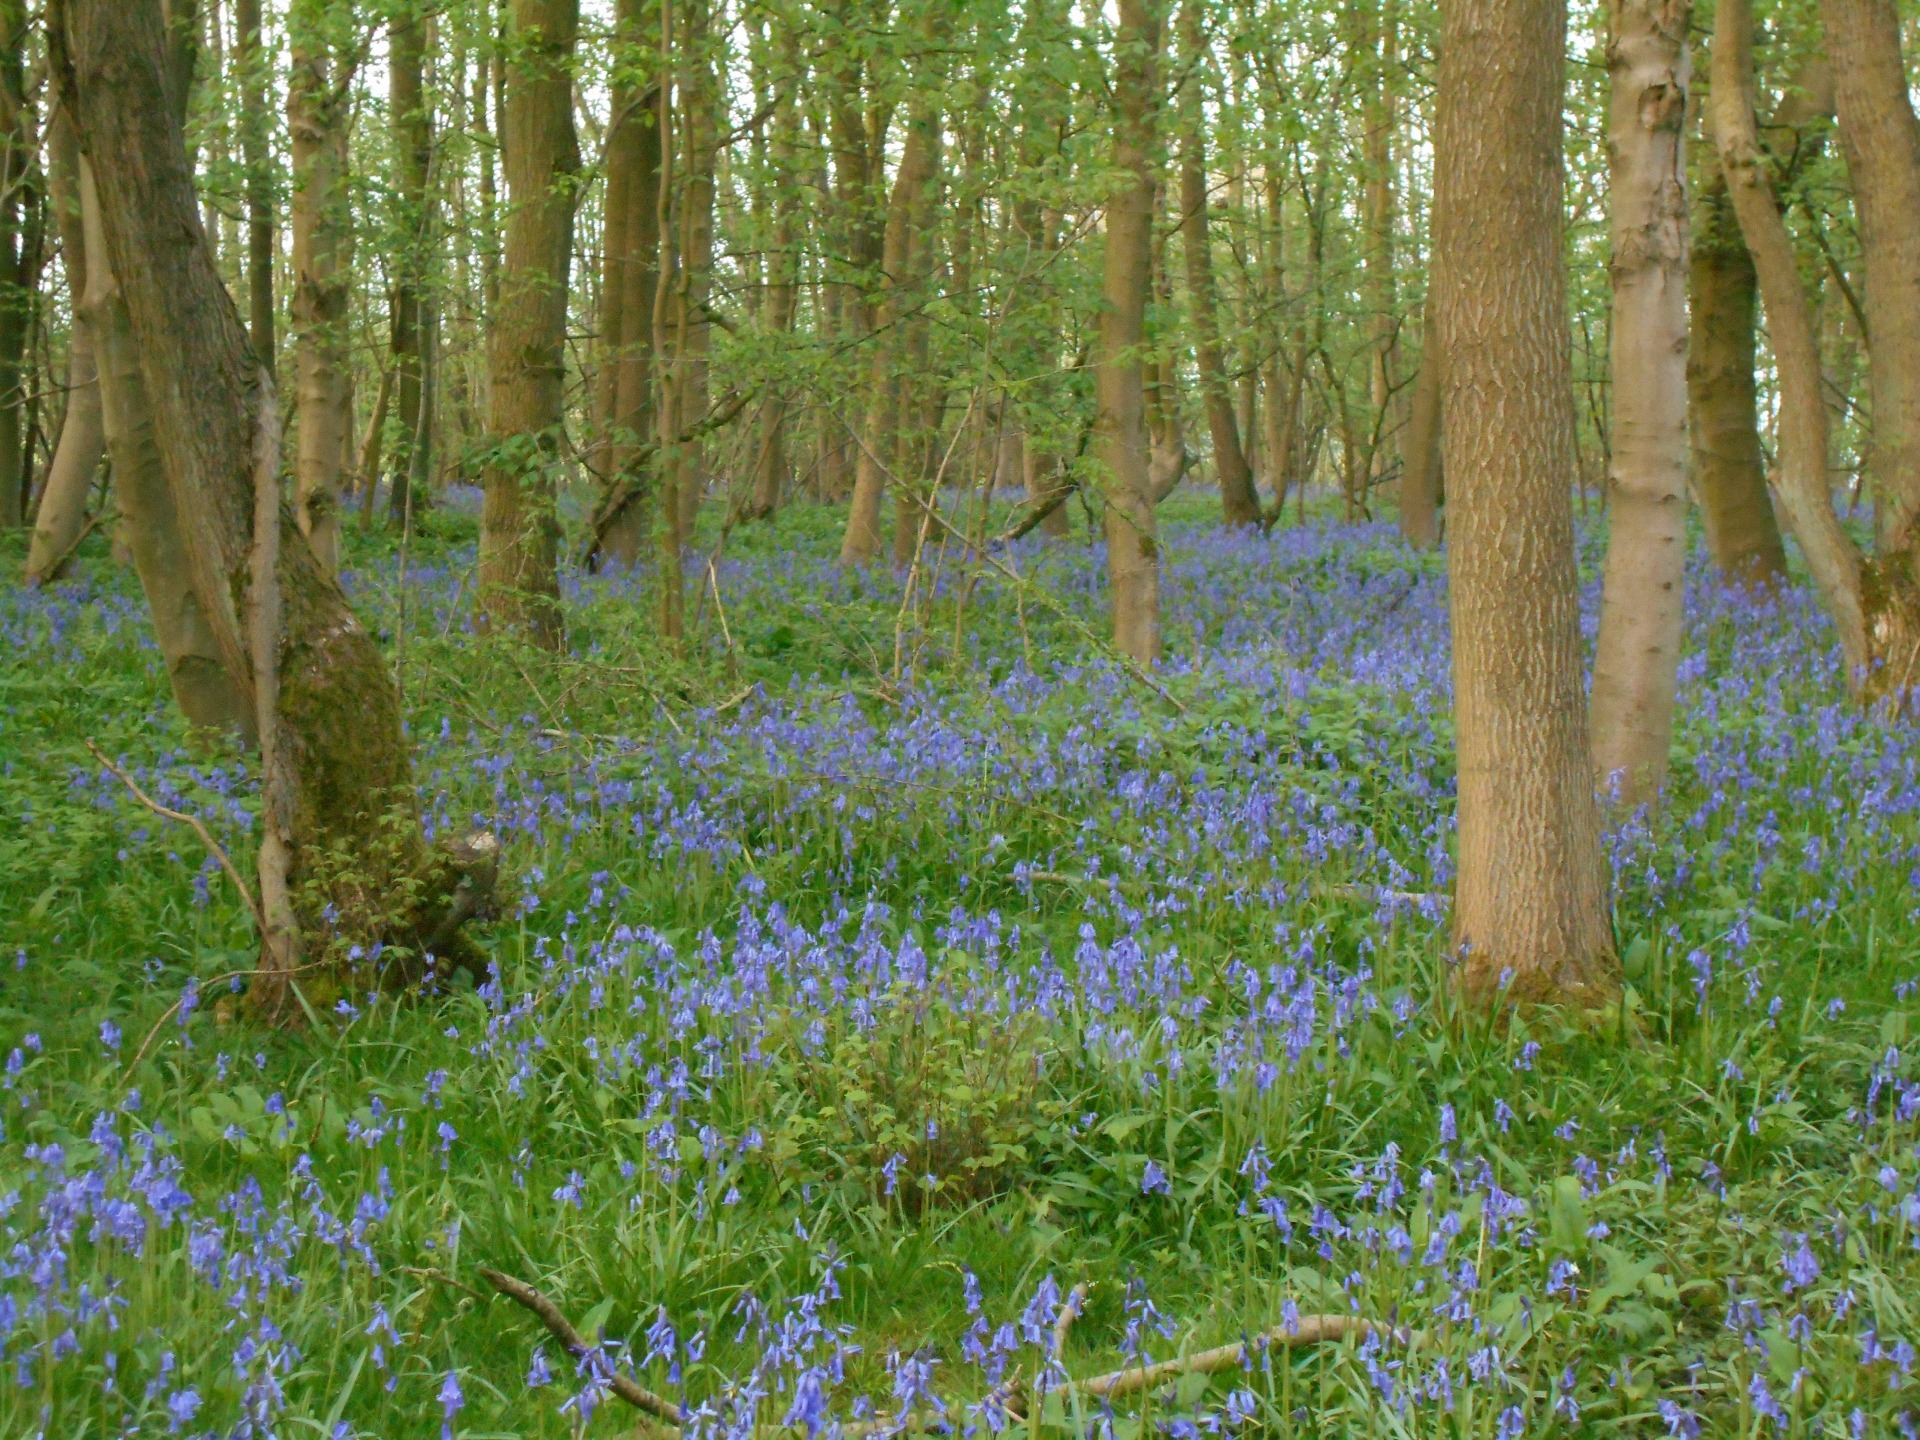 Bluebell wood nearby